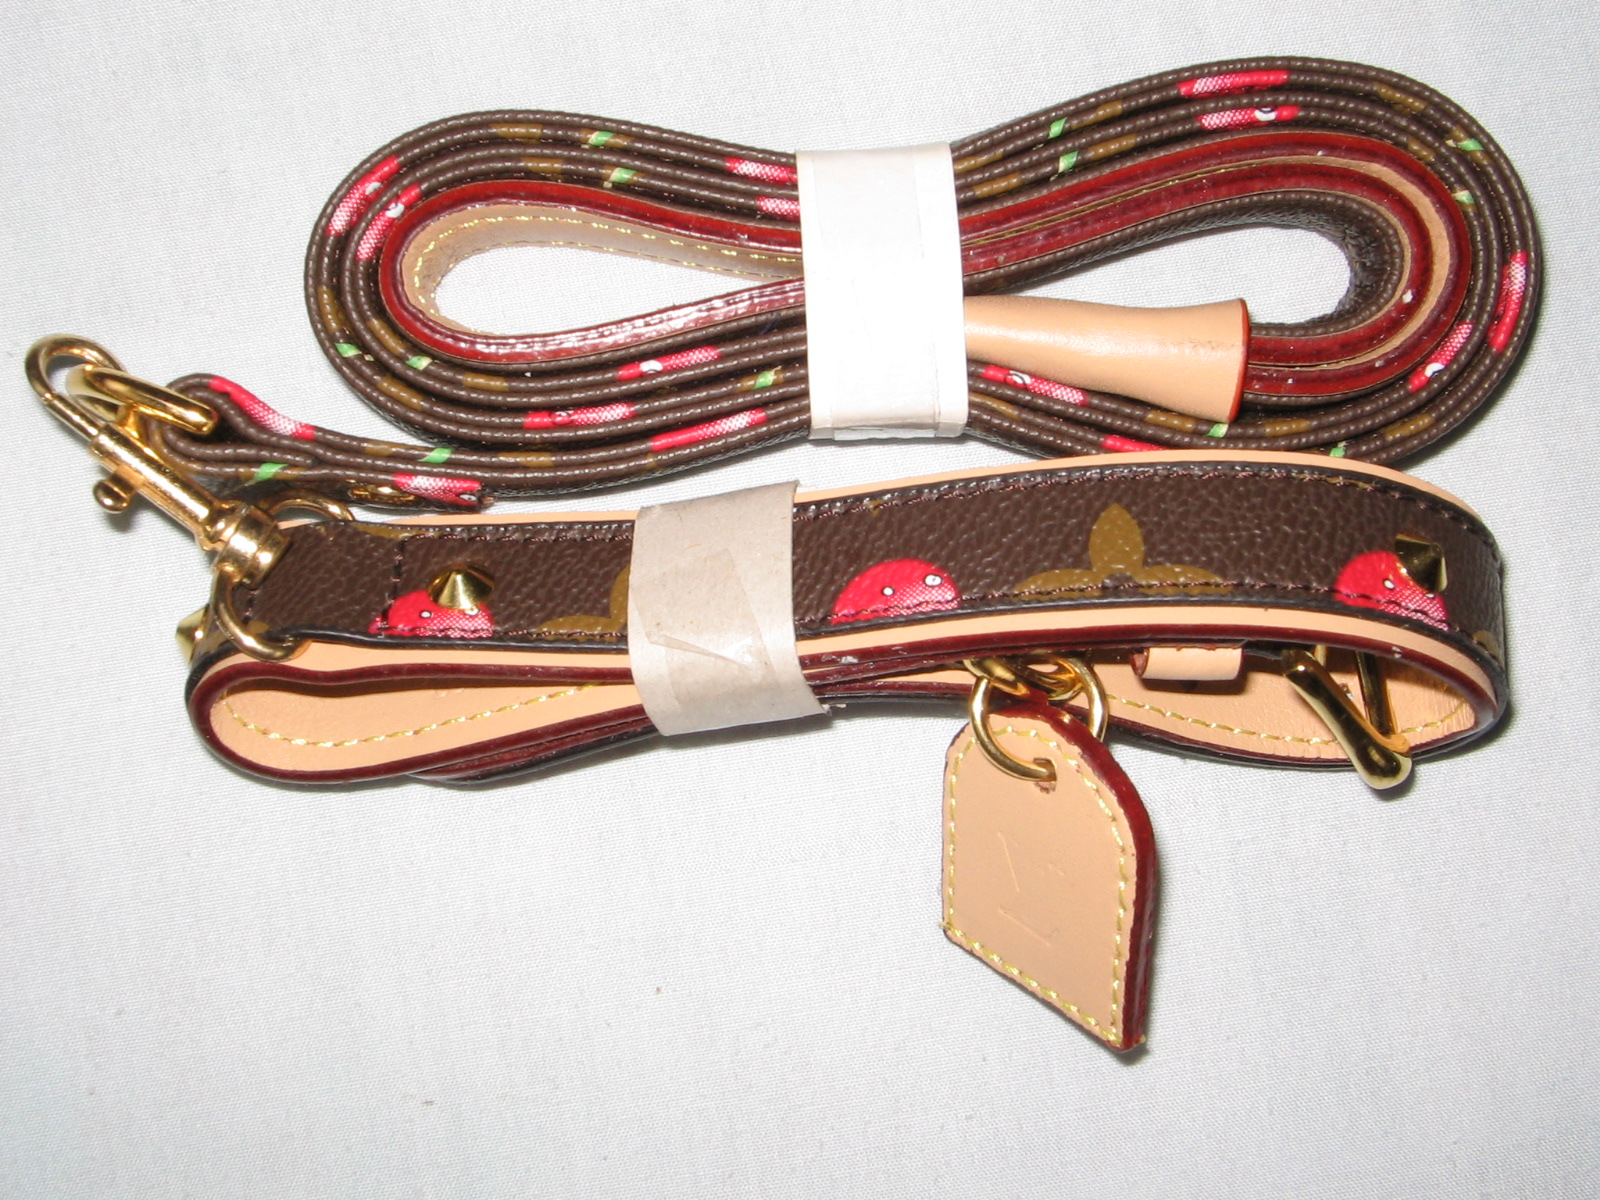 Louis Vuitton dog collar and leash and harness